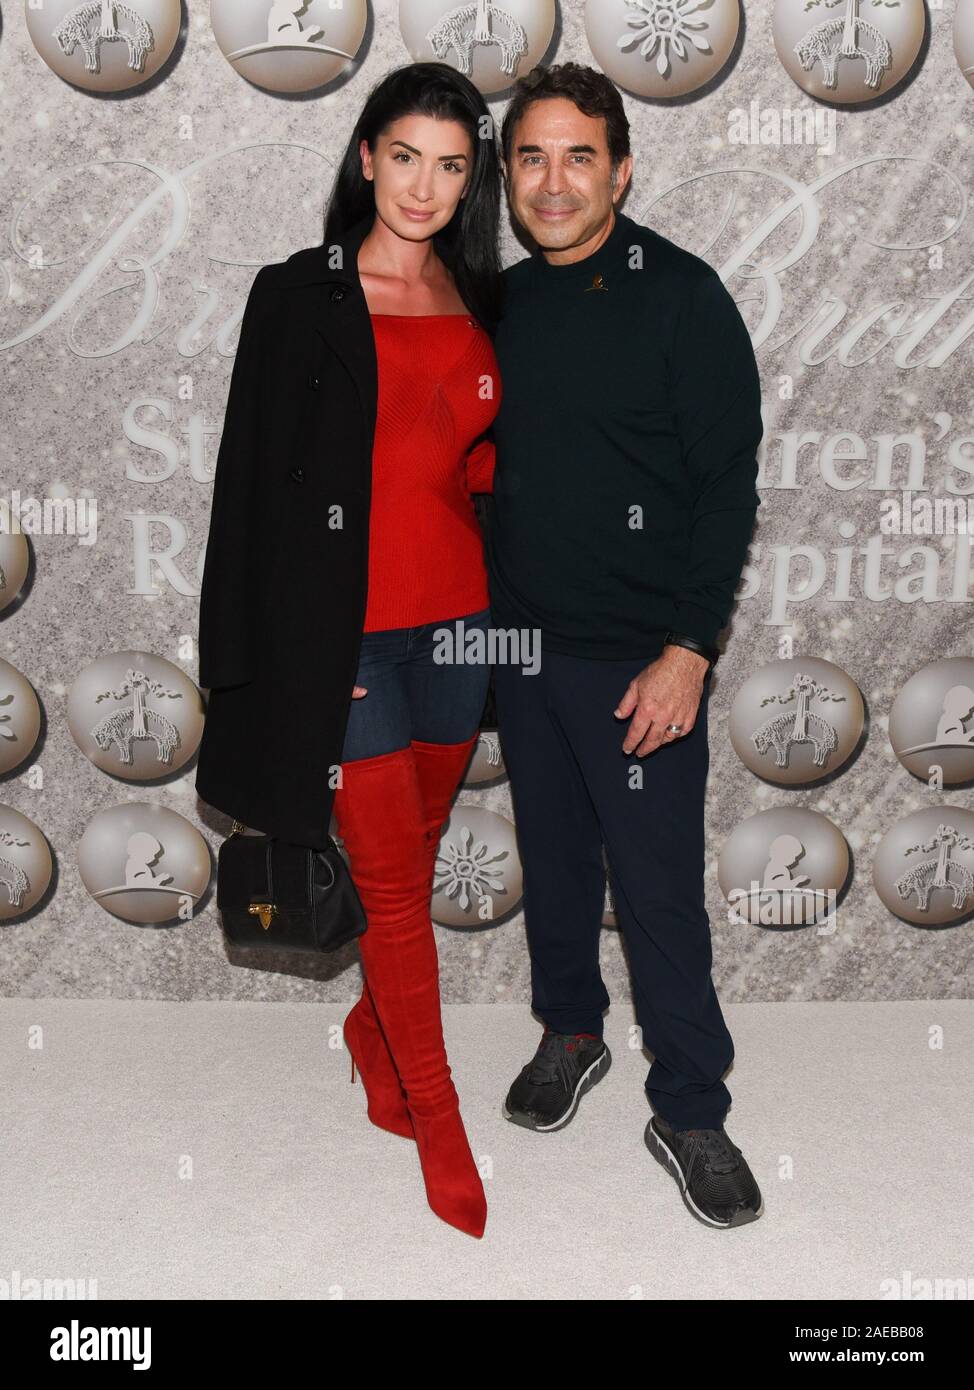 December 7, 2019, West Hollywood, California, USA: Brittany Pattakos and Paul Nassif attends Brooks Brothers Host Annual Holiday Celebration in West Hollywood to Benefit St. Jude. (Credit Image: © Billy Bennight/ZUMA Wire) Stock Photo